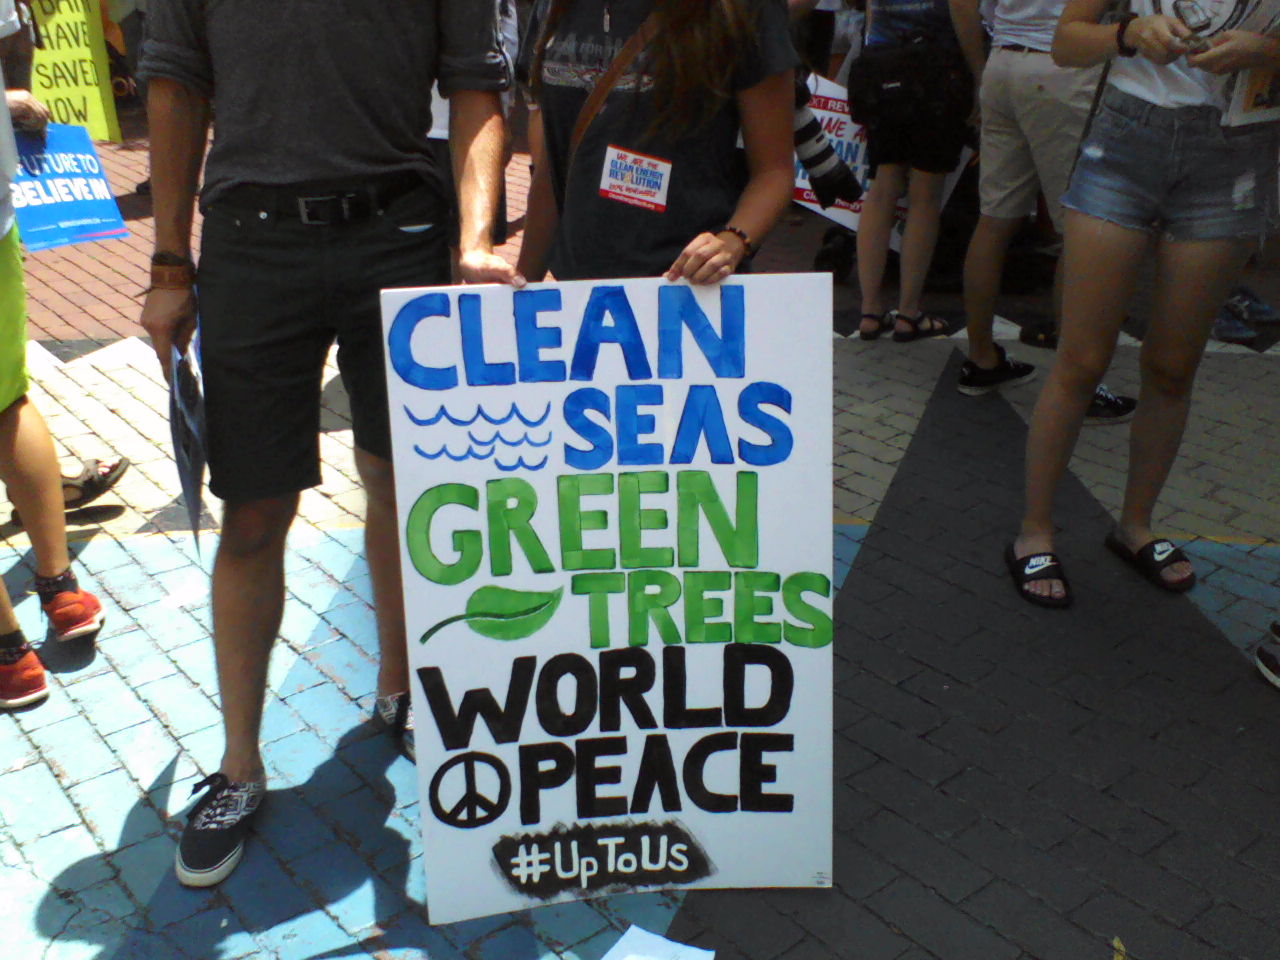 Handmade sign: "Clean Seas" in blue with blue waves, "Green Trees" in green with a green leaf, "World Peace" with a peace symbol in black and hashtag "#UpToUs".